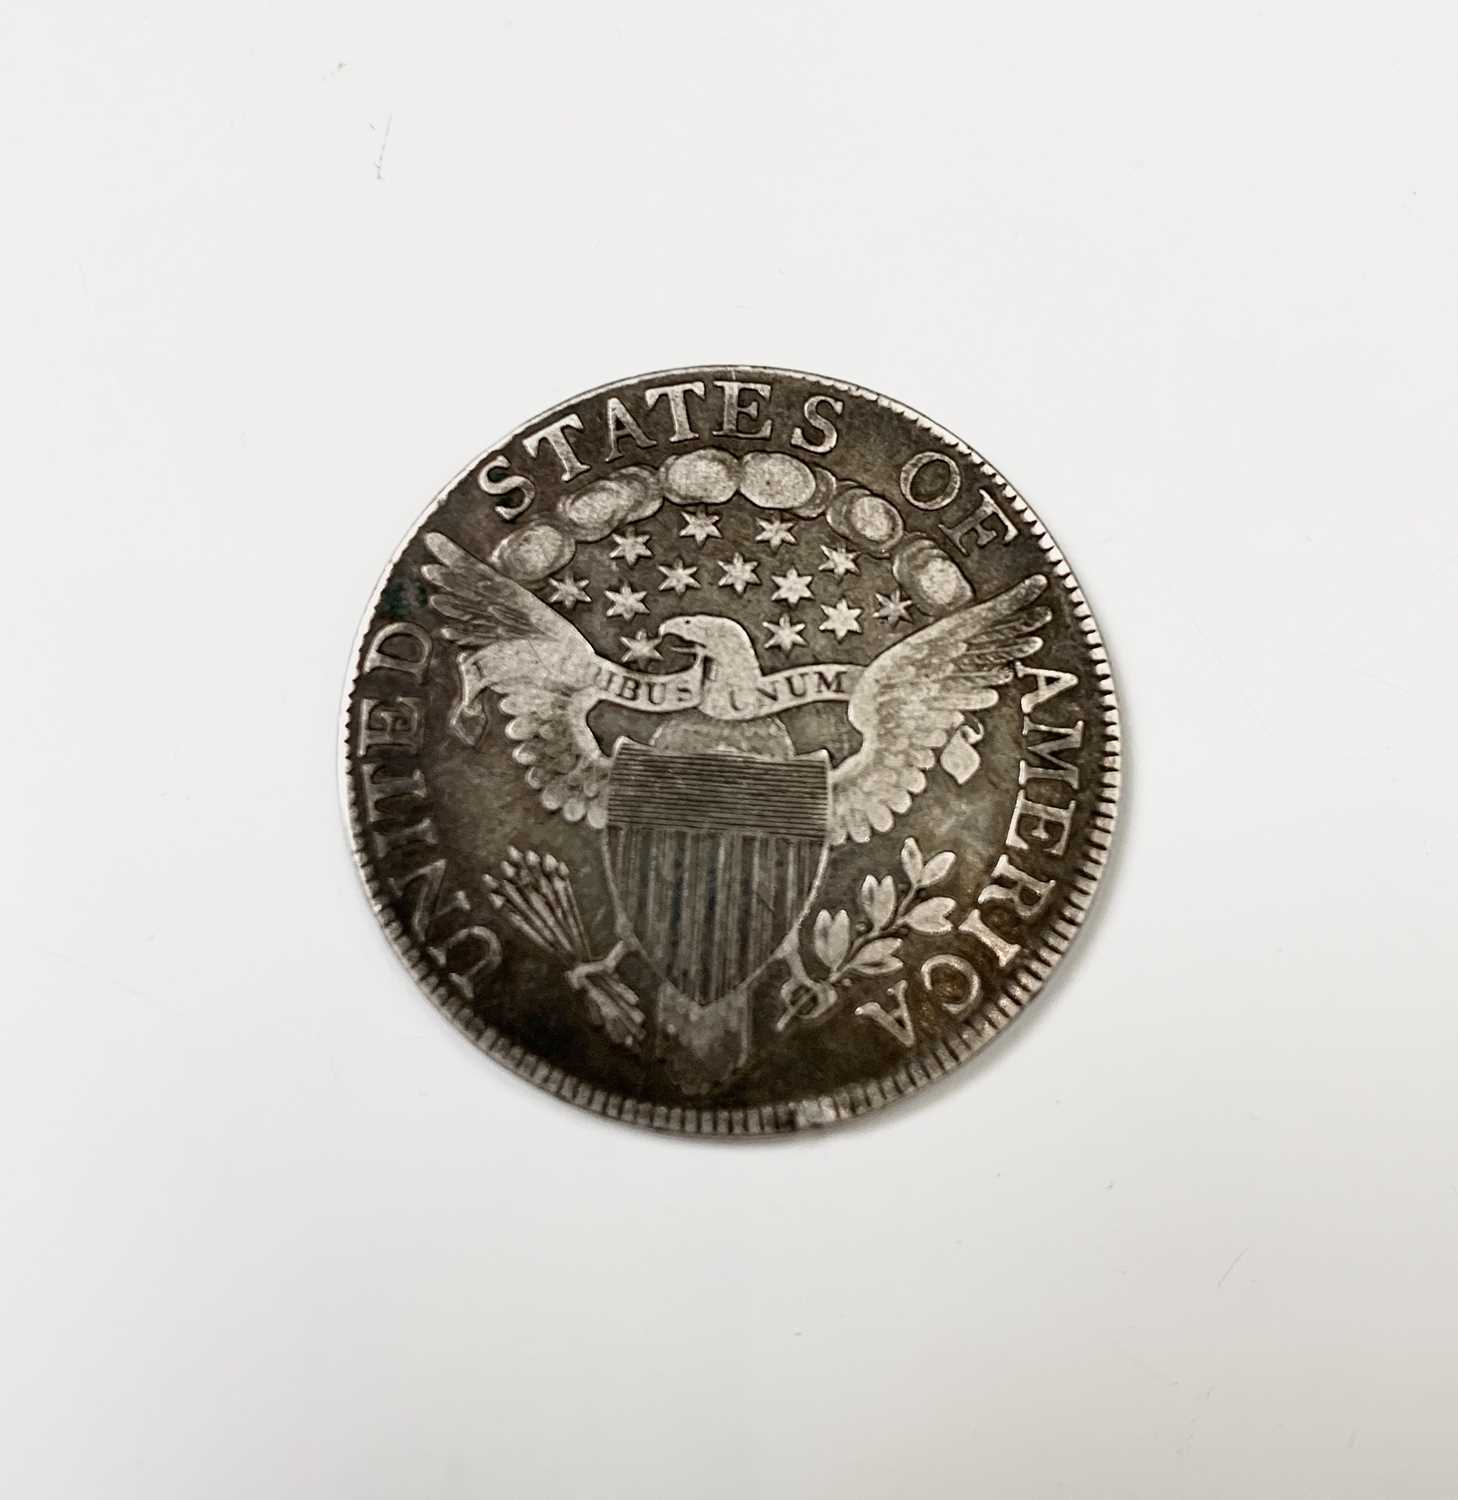 U.S.A. A first issue draped bust Half Dollar 1807 - last year of issue in Fine Condition. - Image 2 of 2